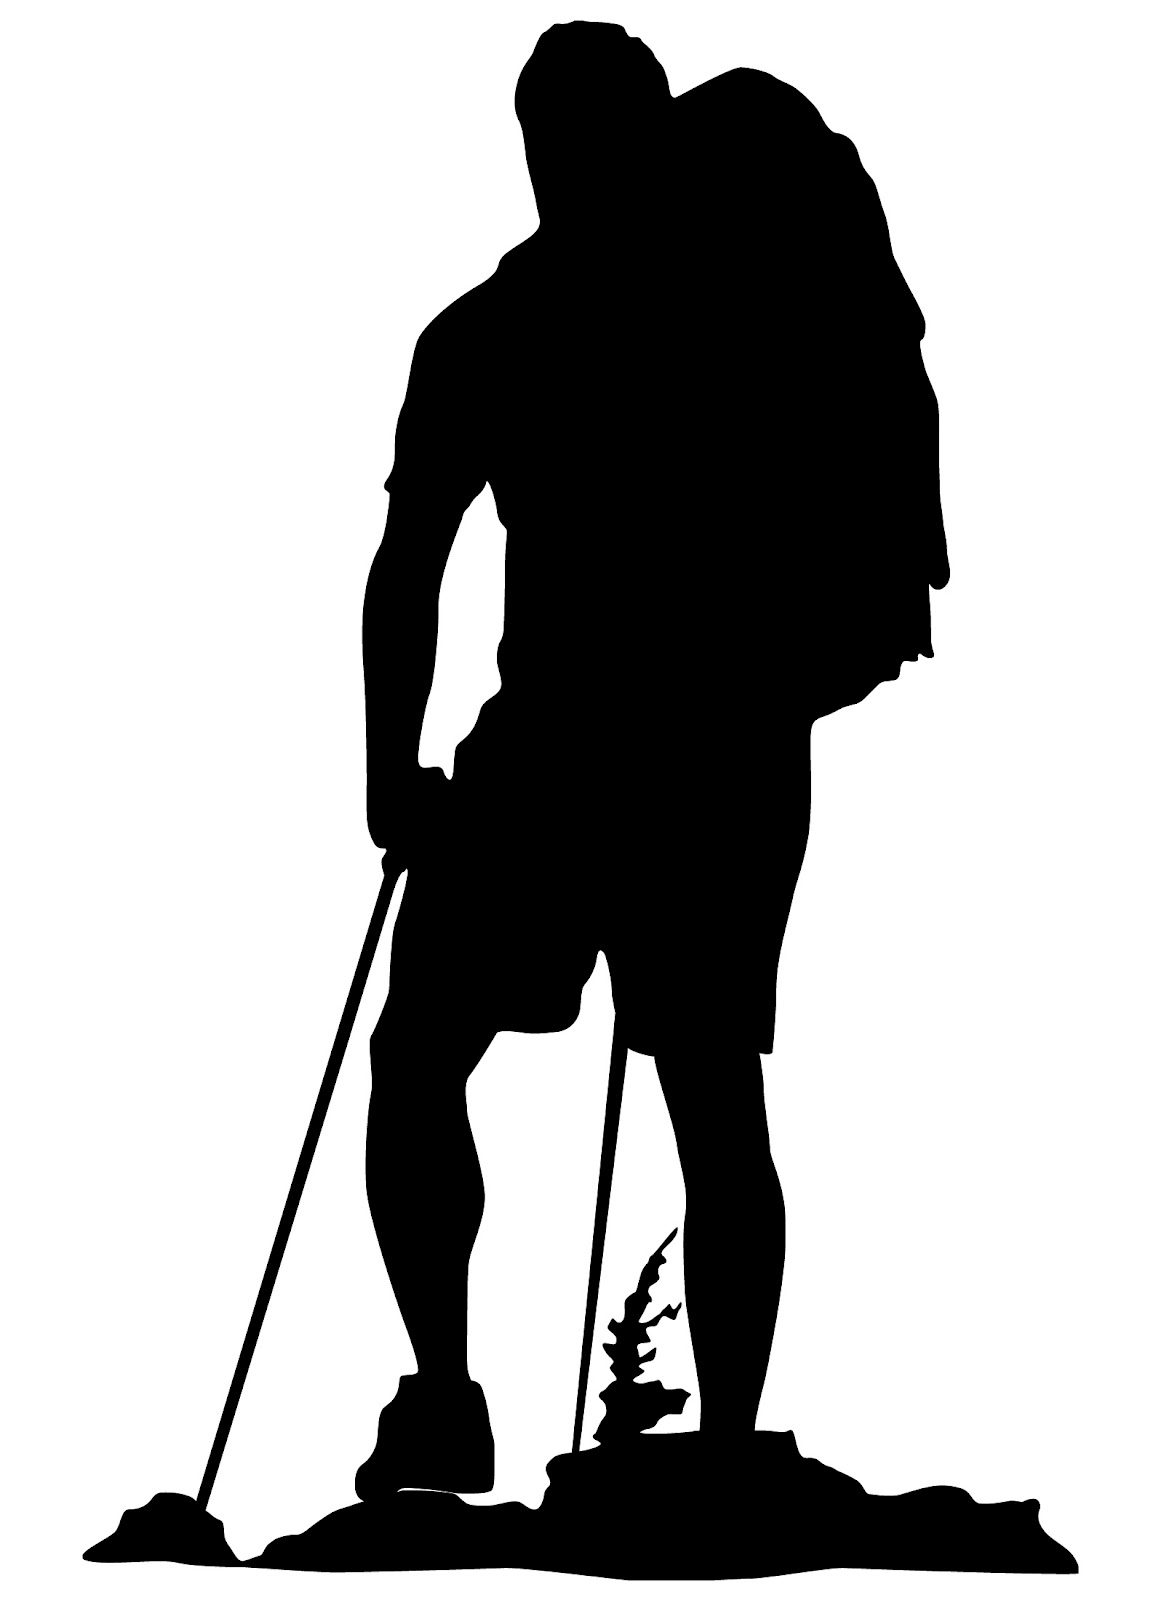 Hiker Pictures Boy Scout Hiking Clip Art Image - Hiking Black And White, Transparent background PNG HD thumbnail